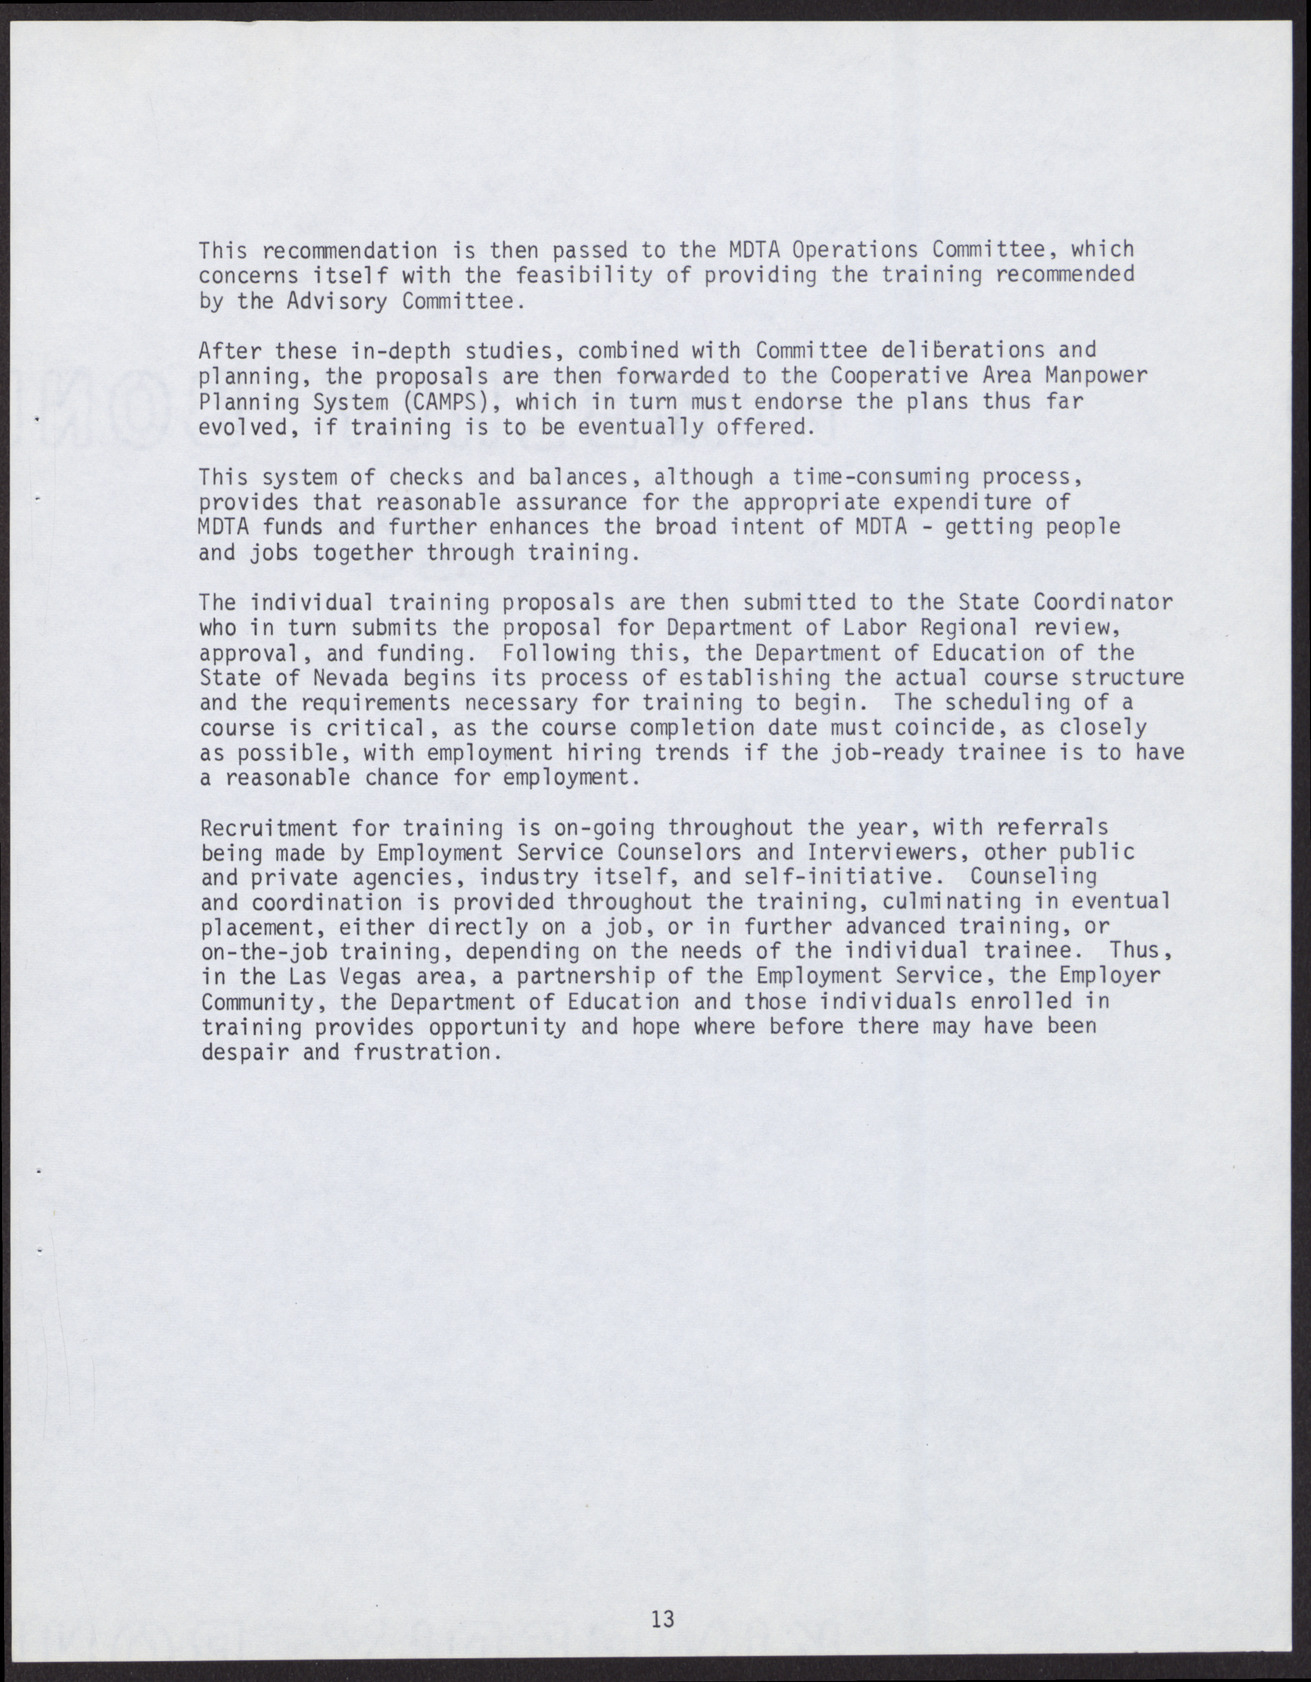 Semi-annual Area Manpower Review (16 pages), Fall 1969, page 16